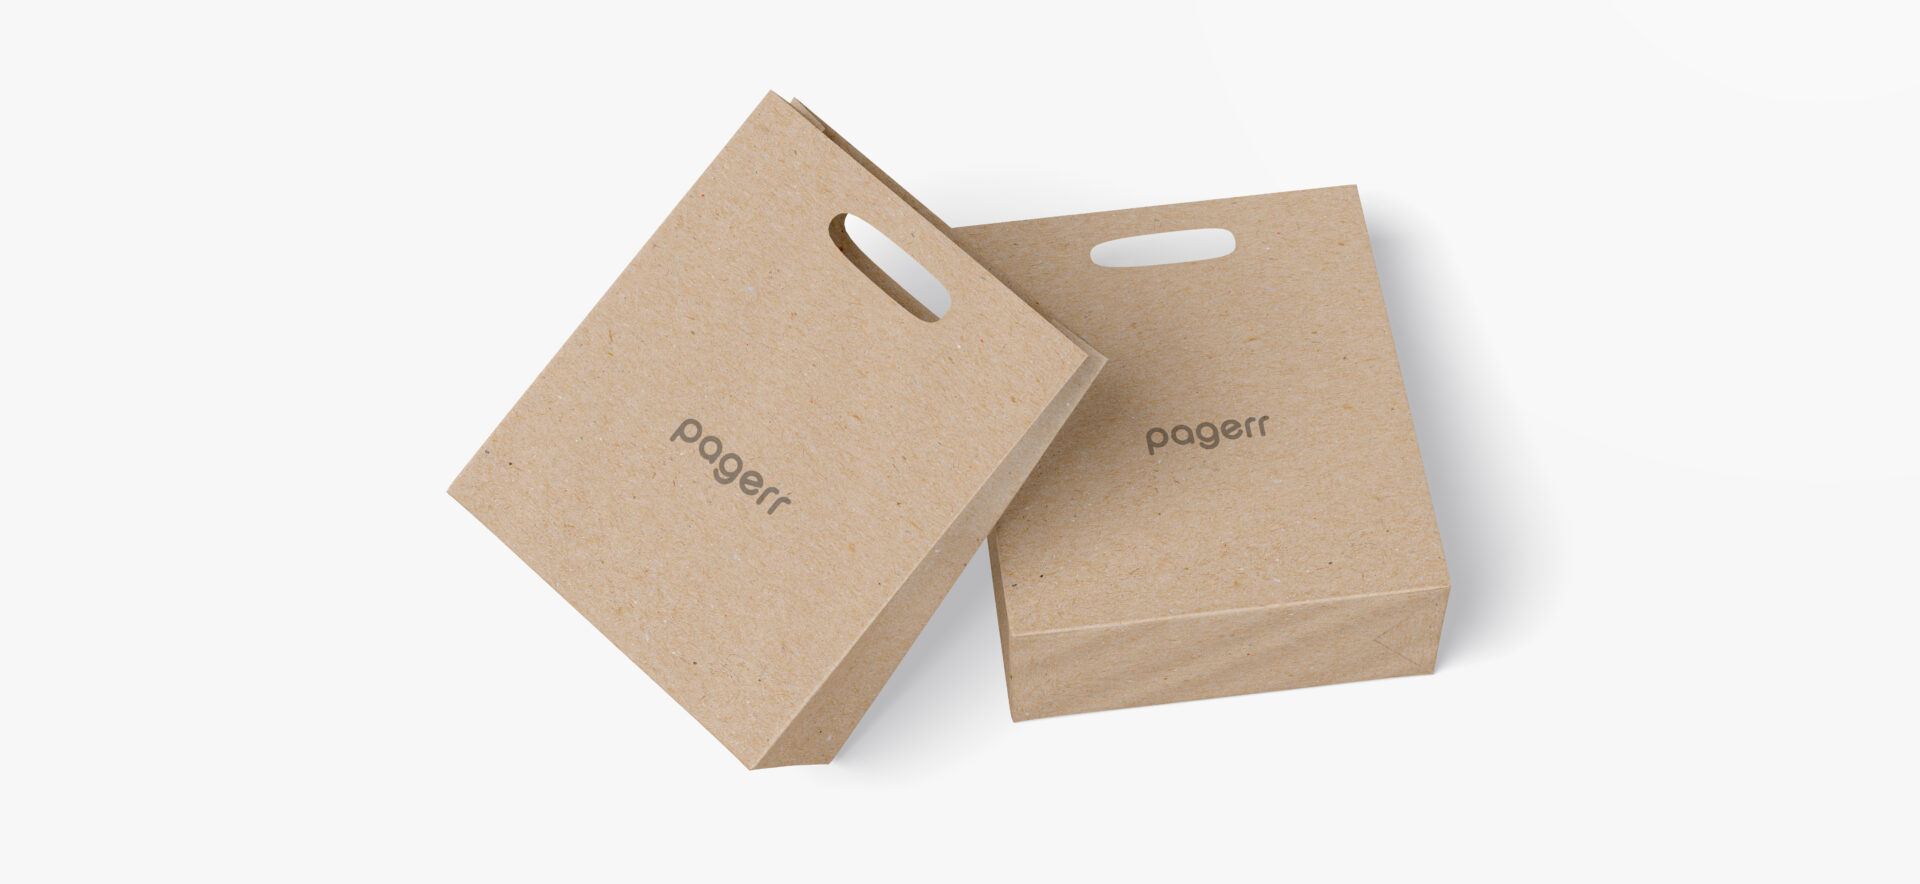 Takeaway bags in Melbourne - Print with Pagerr